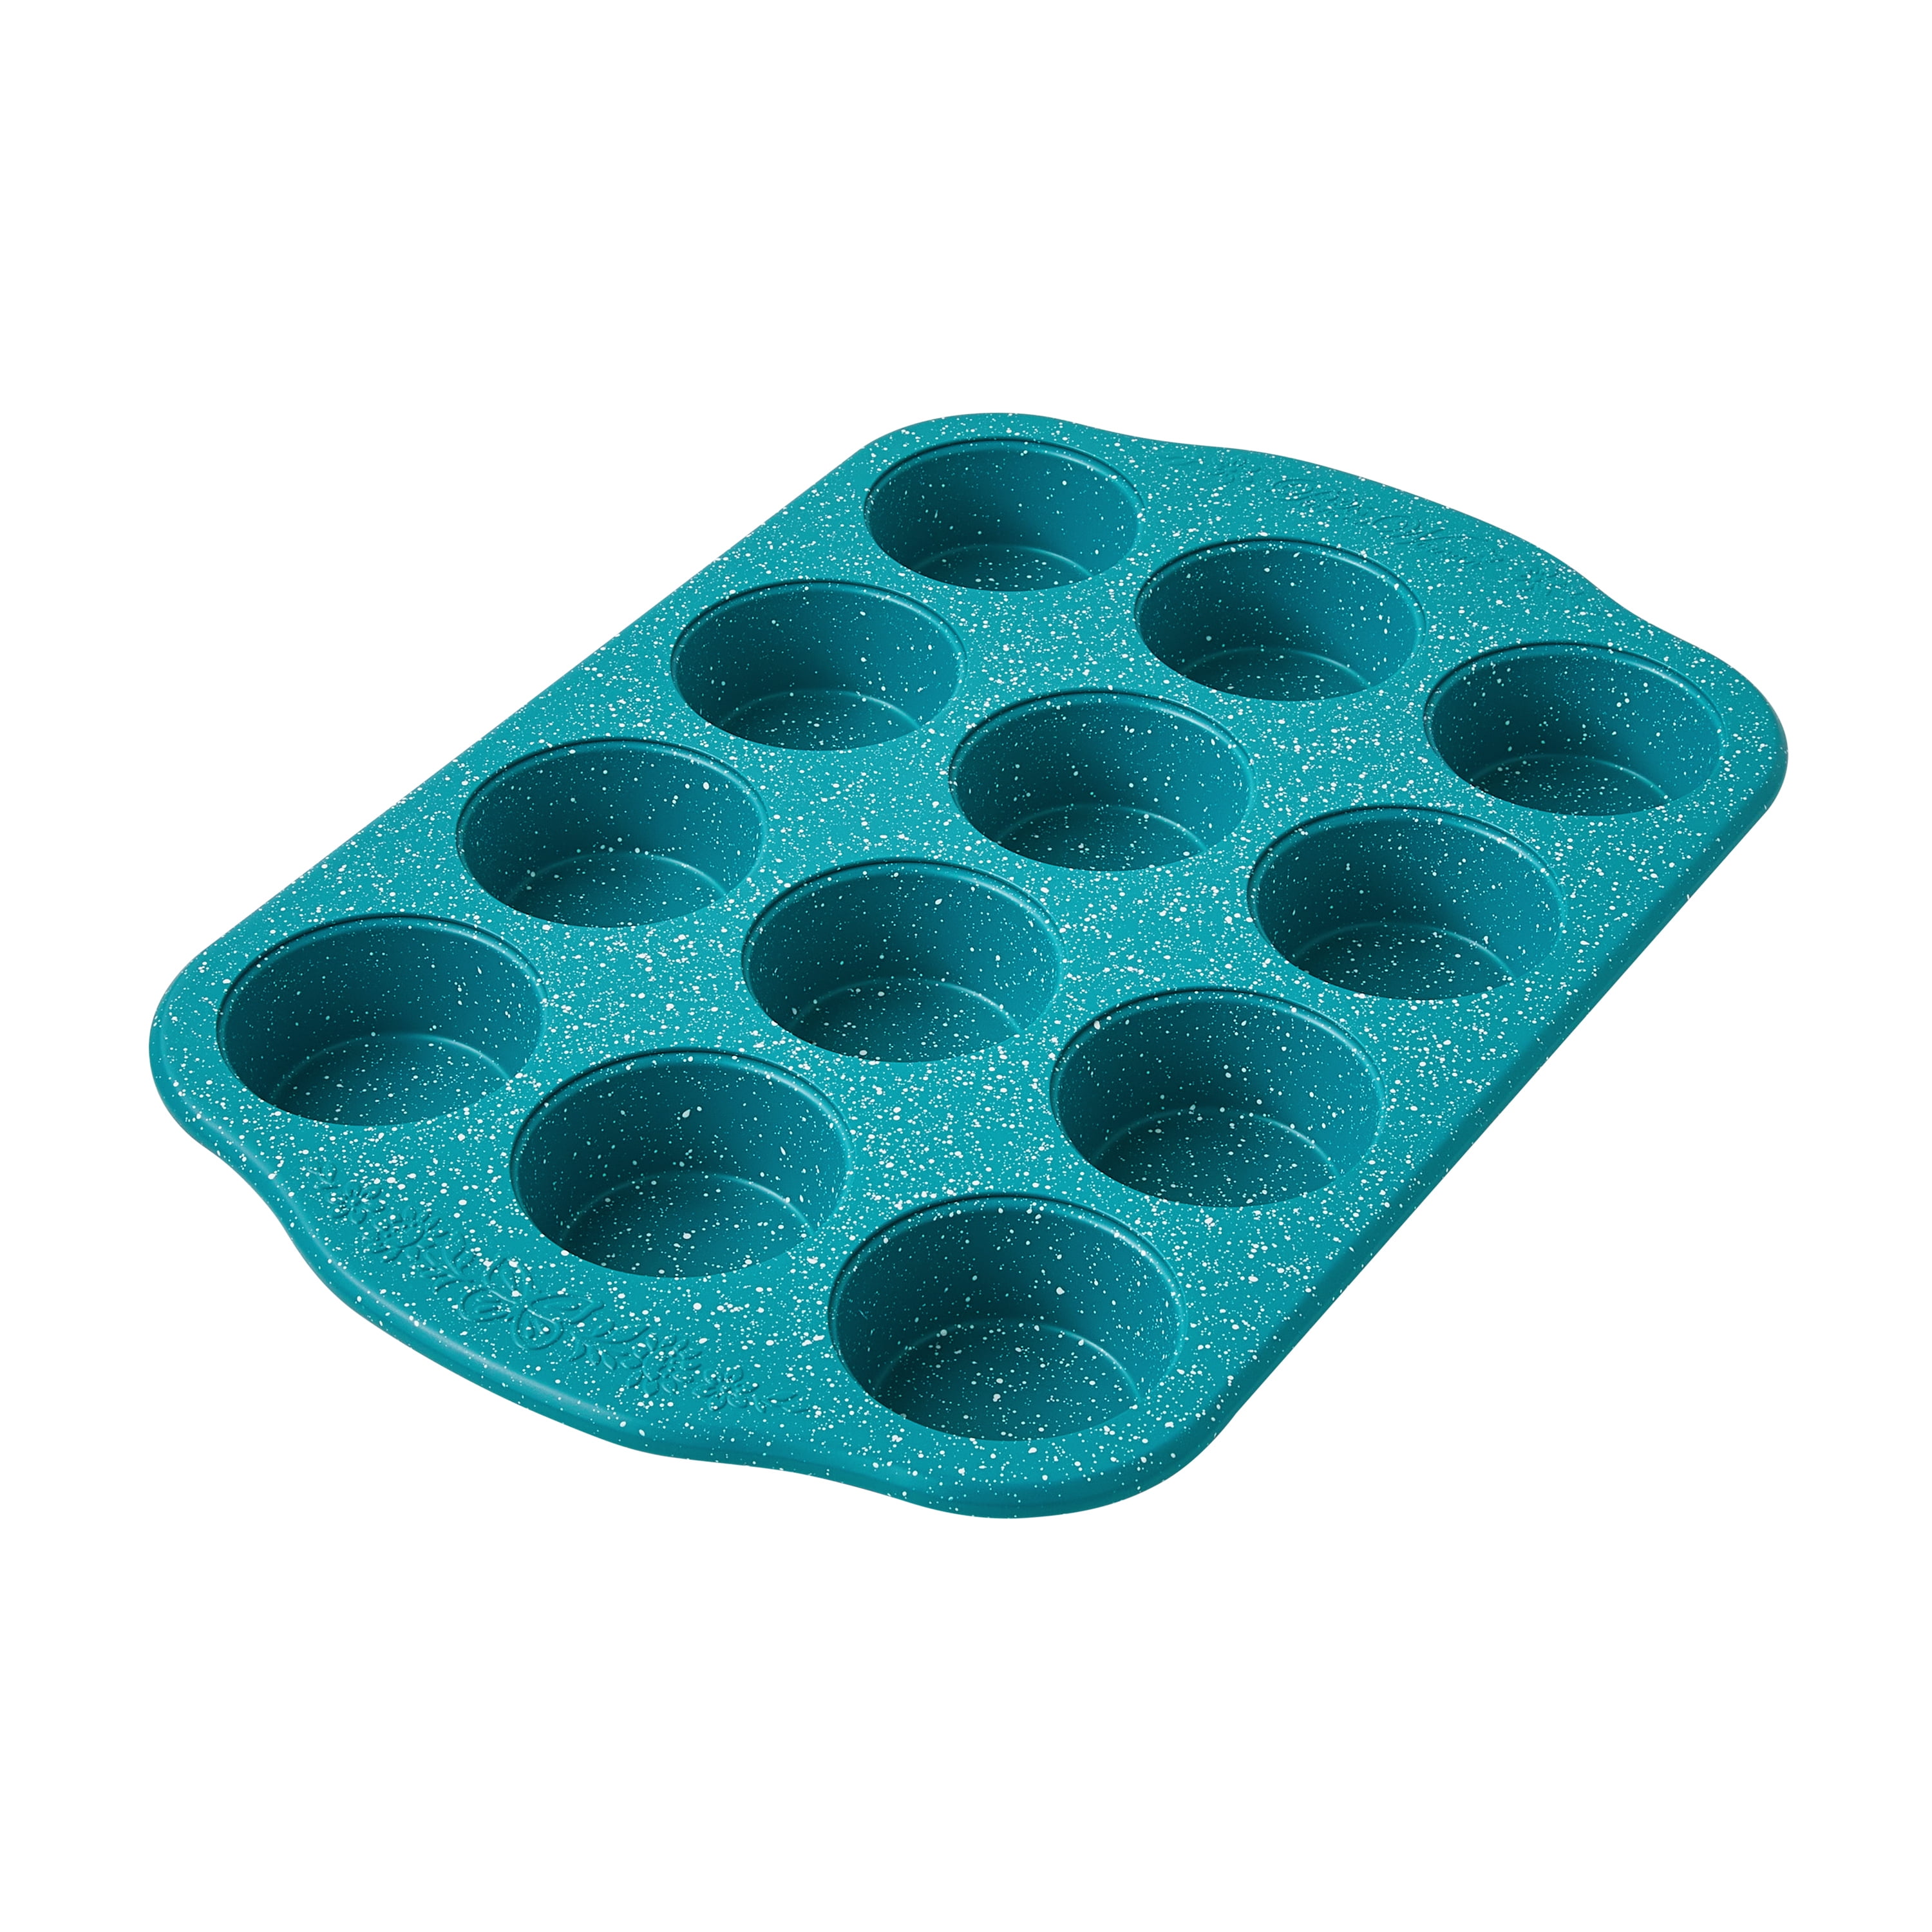 Gray Speckled 12-Cup Muffin Pan